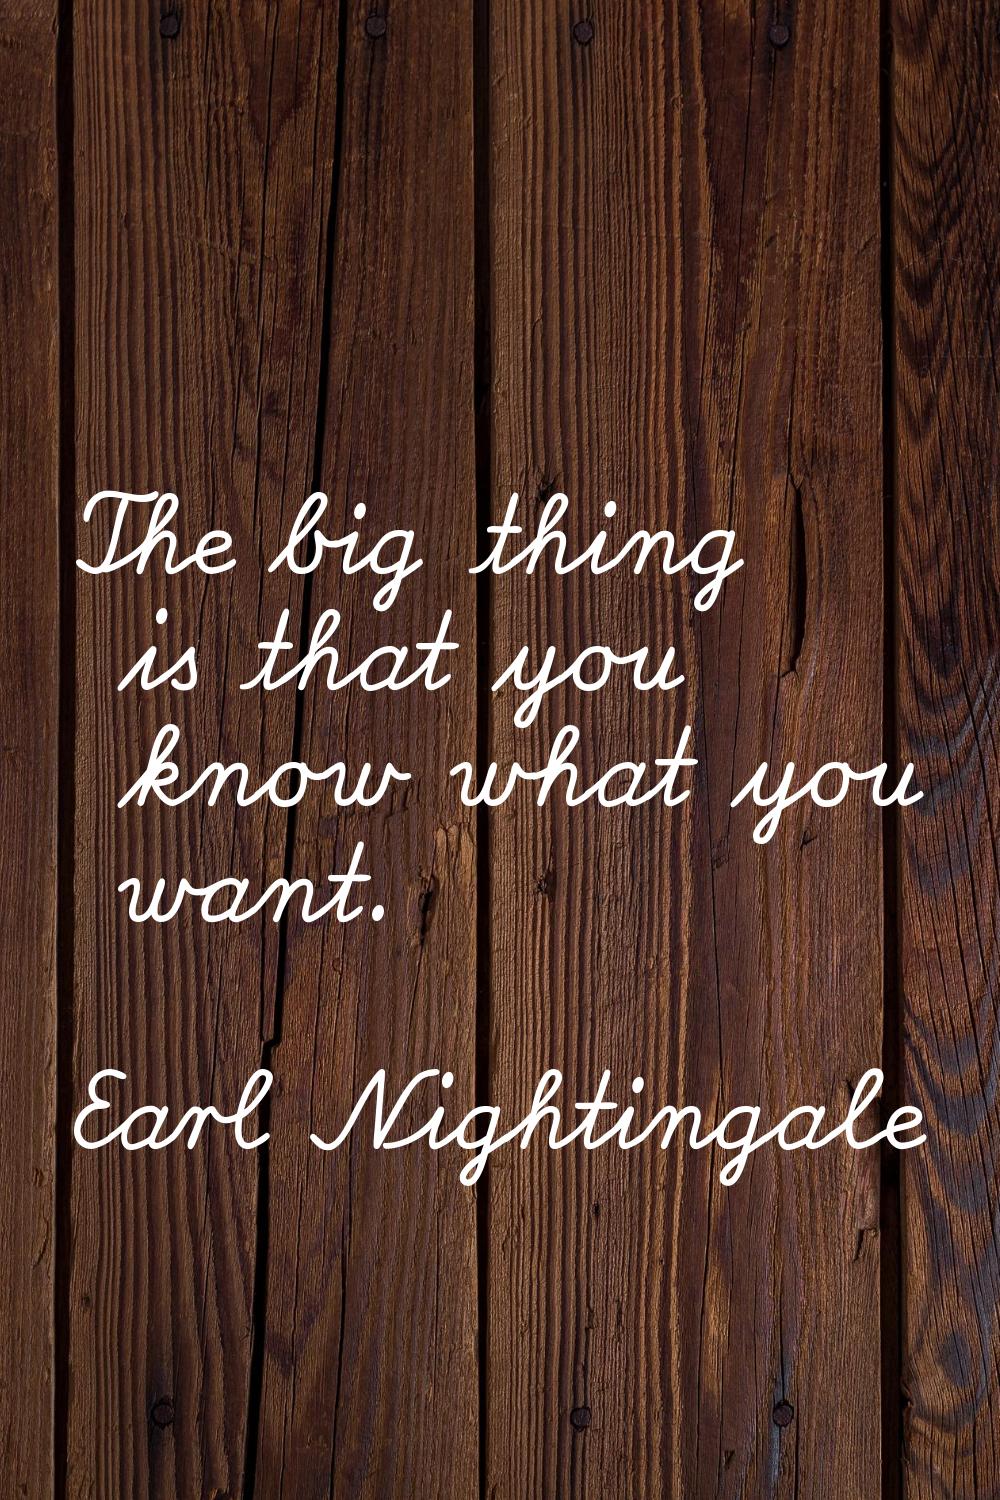 The big thing is that you know what you want.